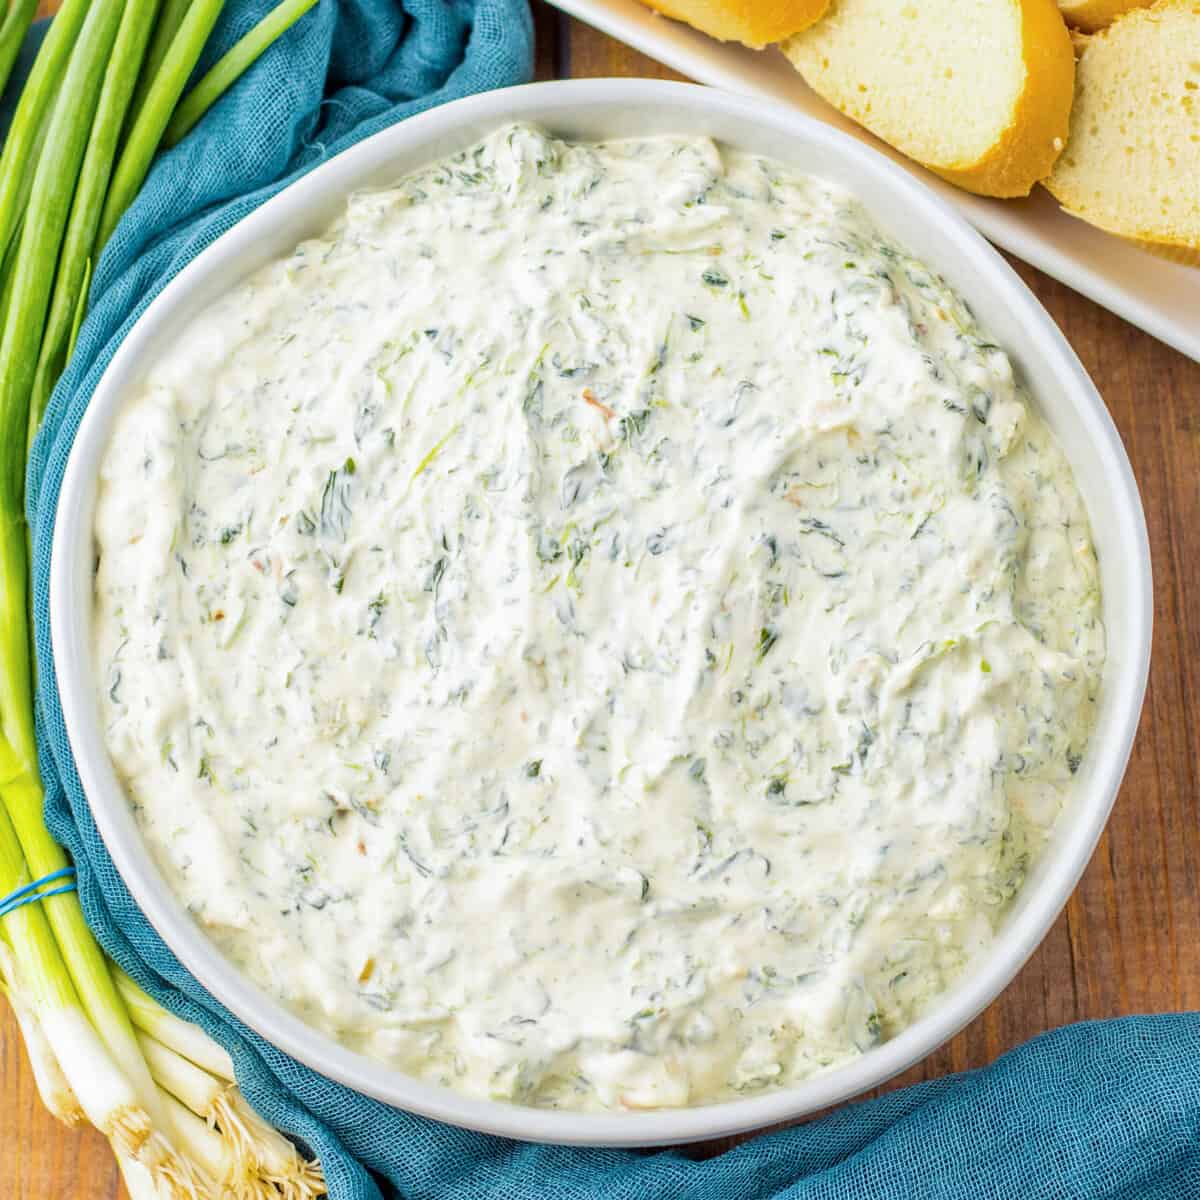 Cold and creamy Knorr spinach dip served with sliced bread pieces for dipping.